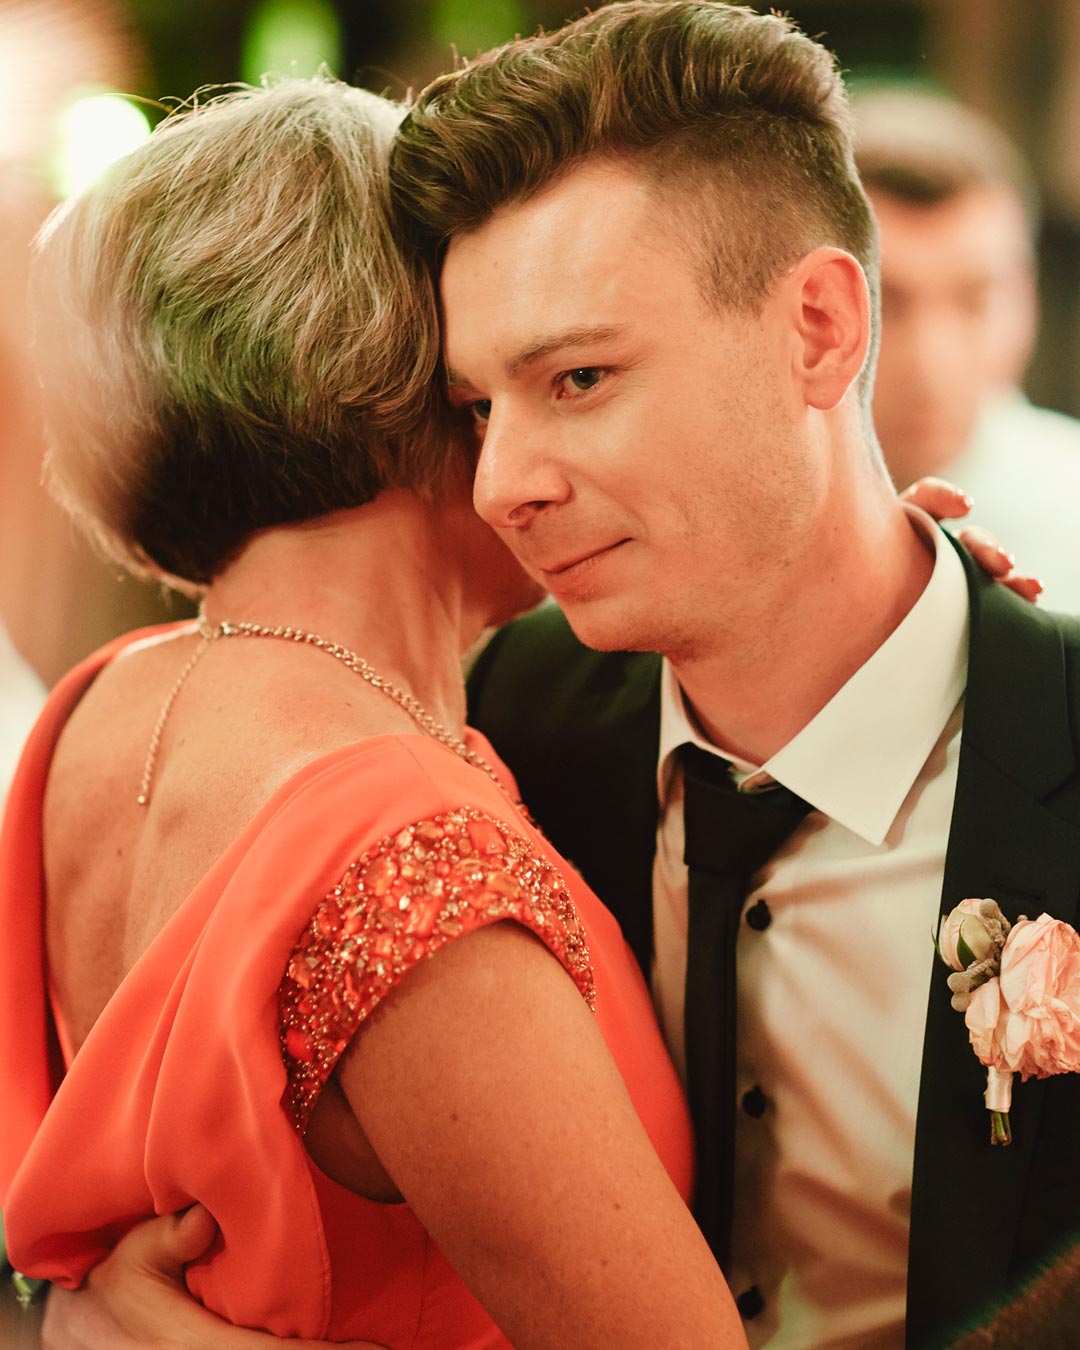 mother son wedding songs upbeat